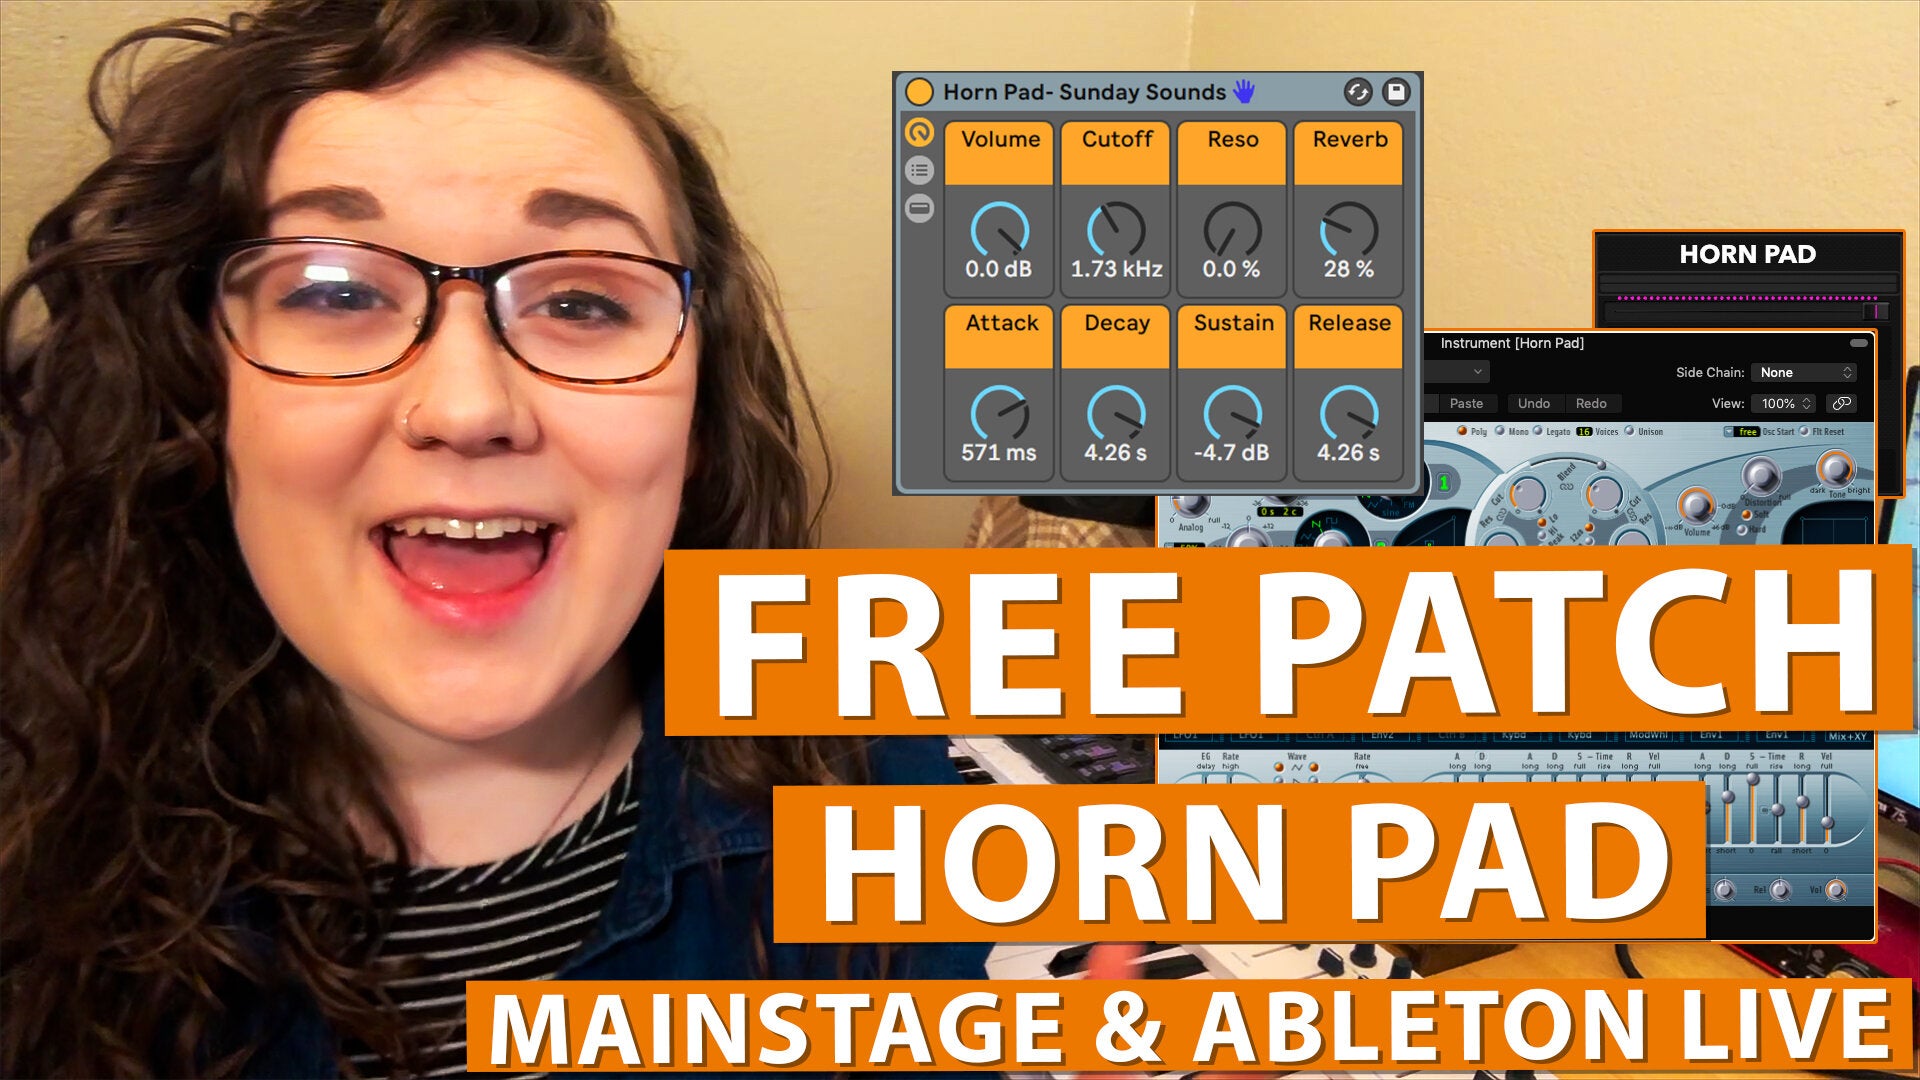 Free MainStage & Ableton Worship Patch! - Horn Pad